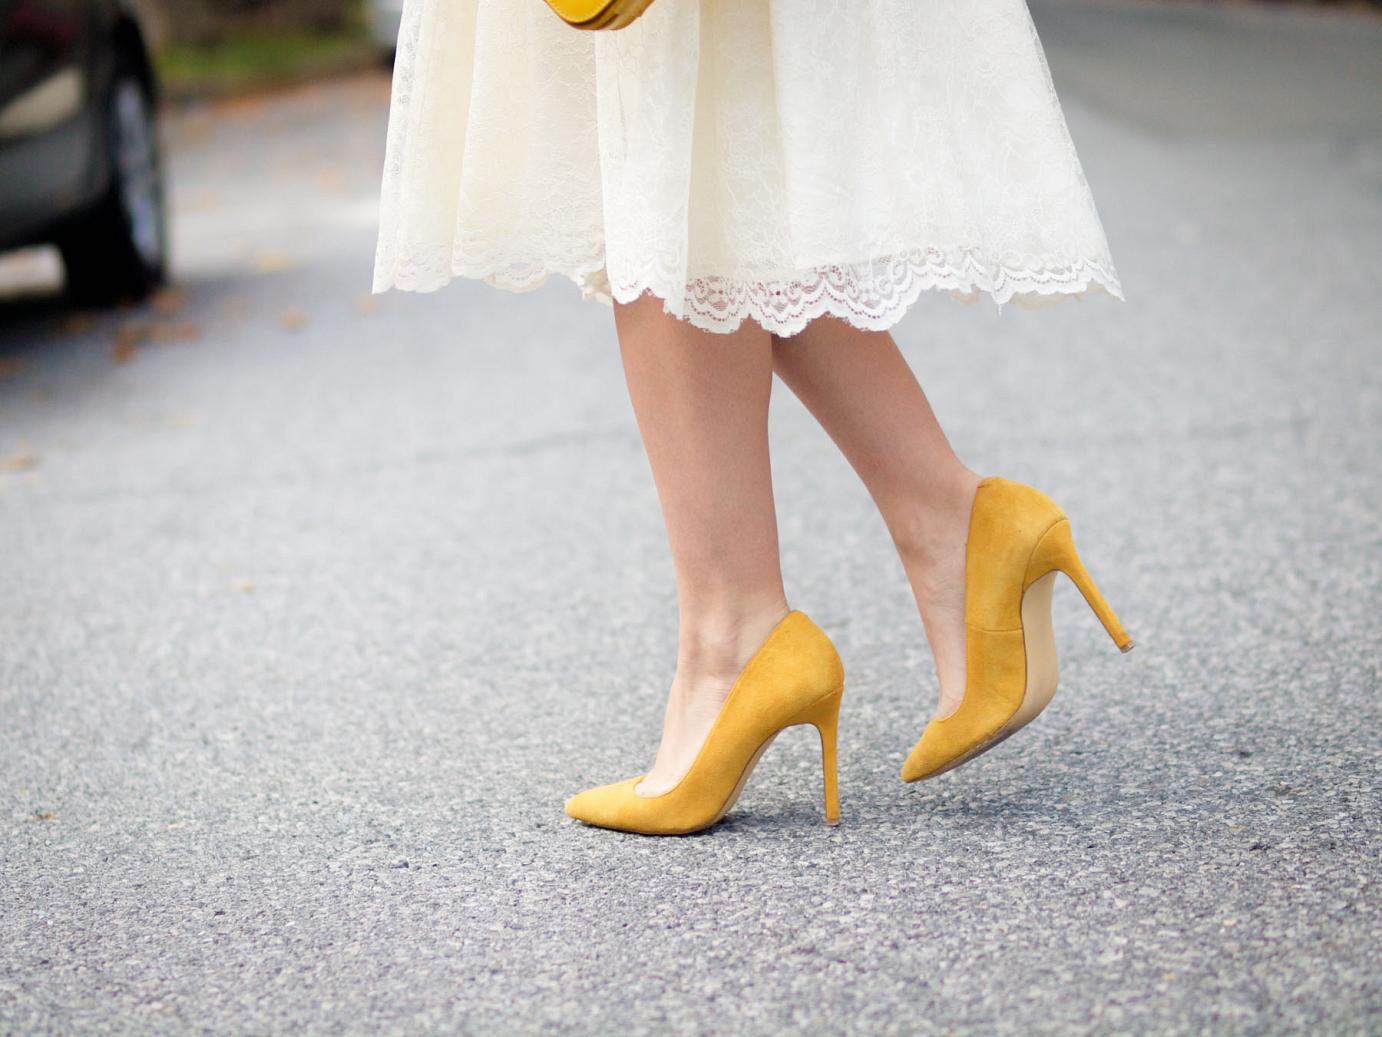 bittersweet colours, street style, fall trends, lace skirt, lace trend, yellow shoes, neoprene jacket, maternity style, fall in lace